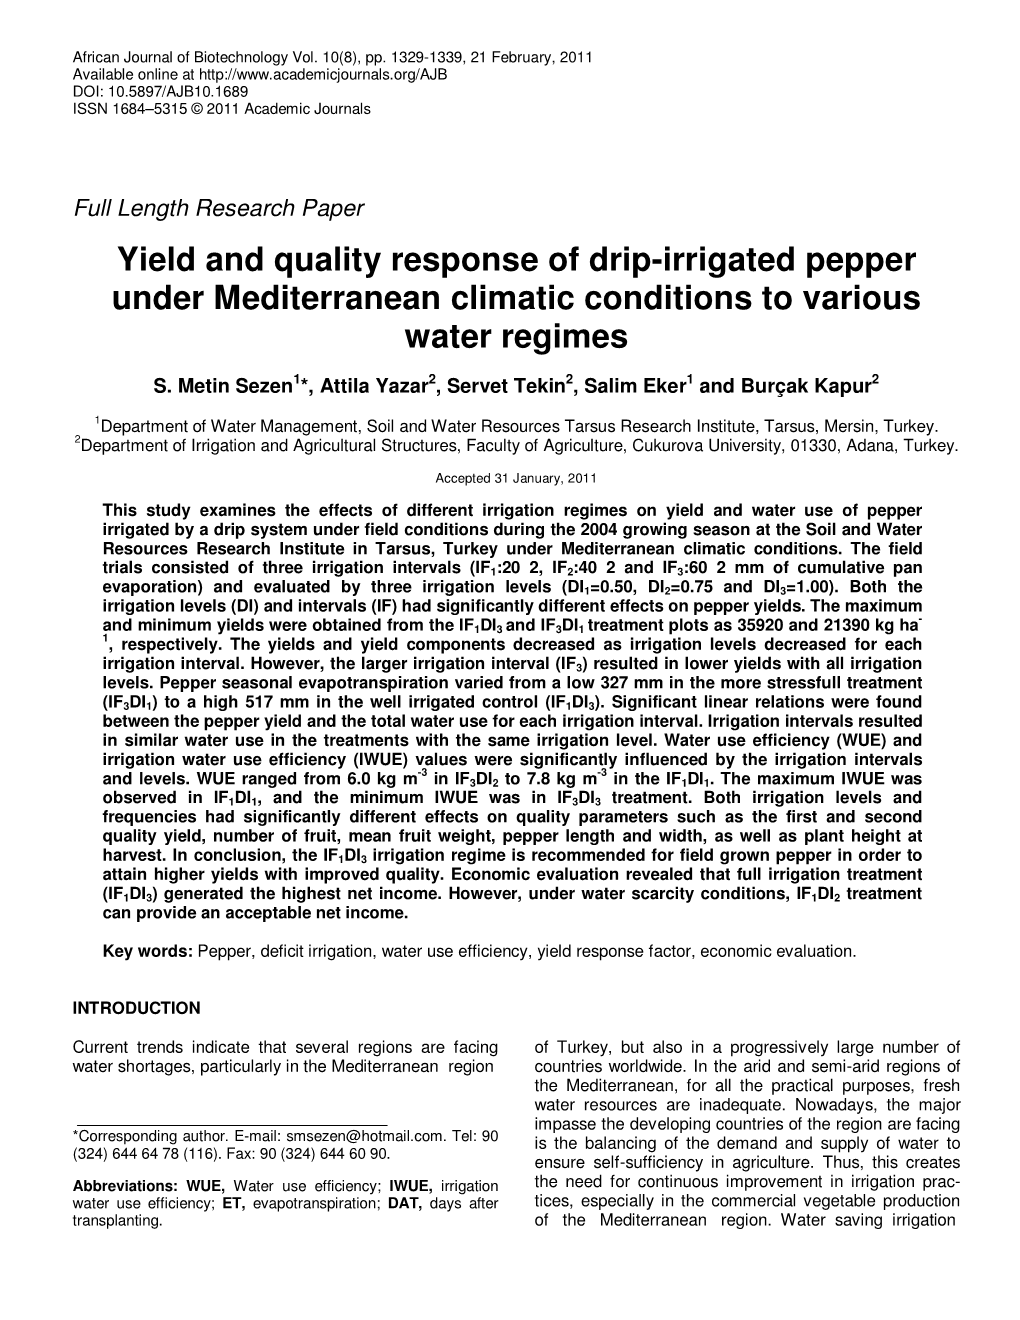 Yield and Quality Response of Drip-Irrigated Pepper Under Mediterranean Climatic Conditions to Various Water Regimes